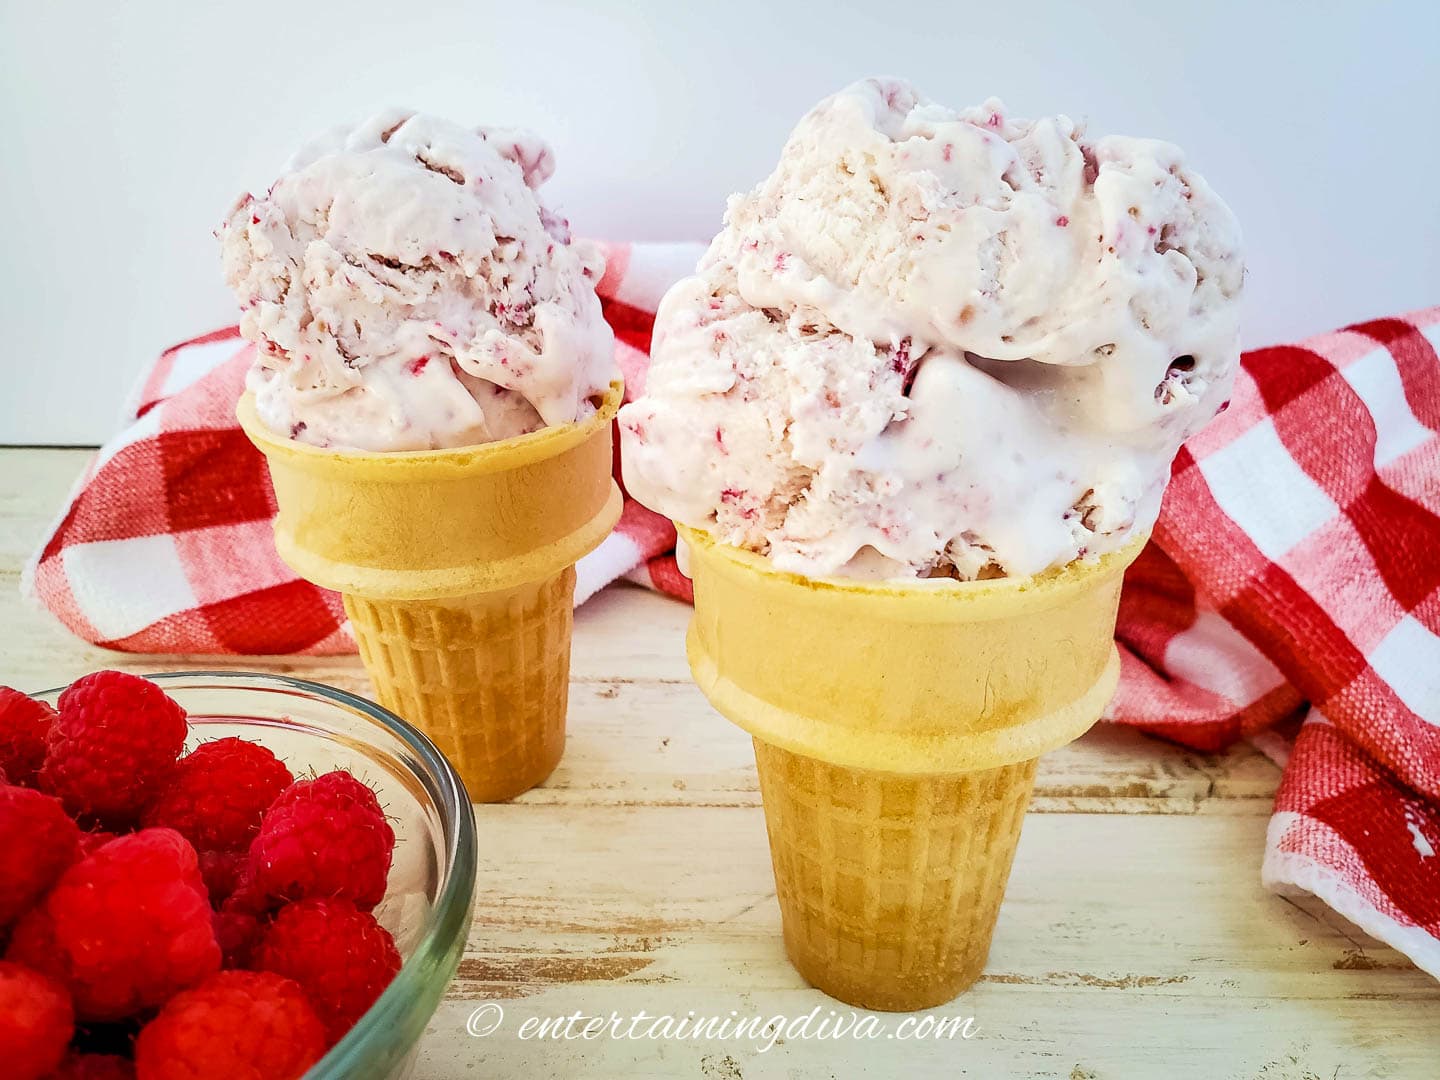 two raspberry ice cream cones with a bowl of raspberries in front or them and a red and white towel behind